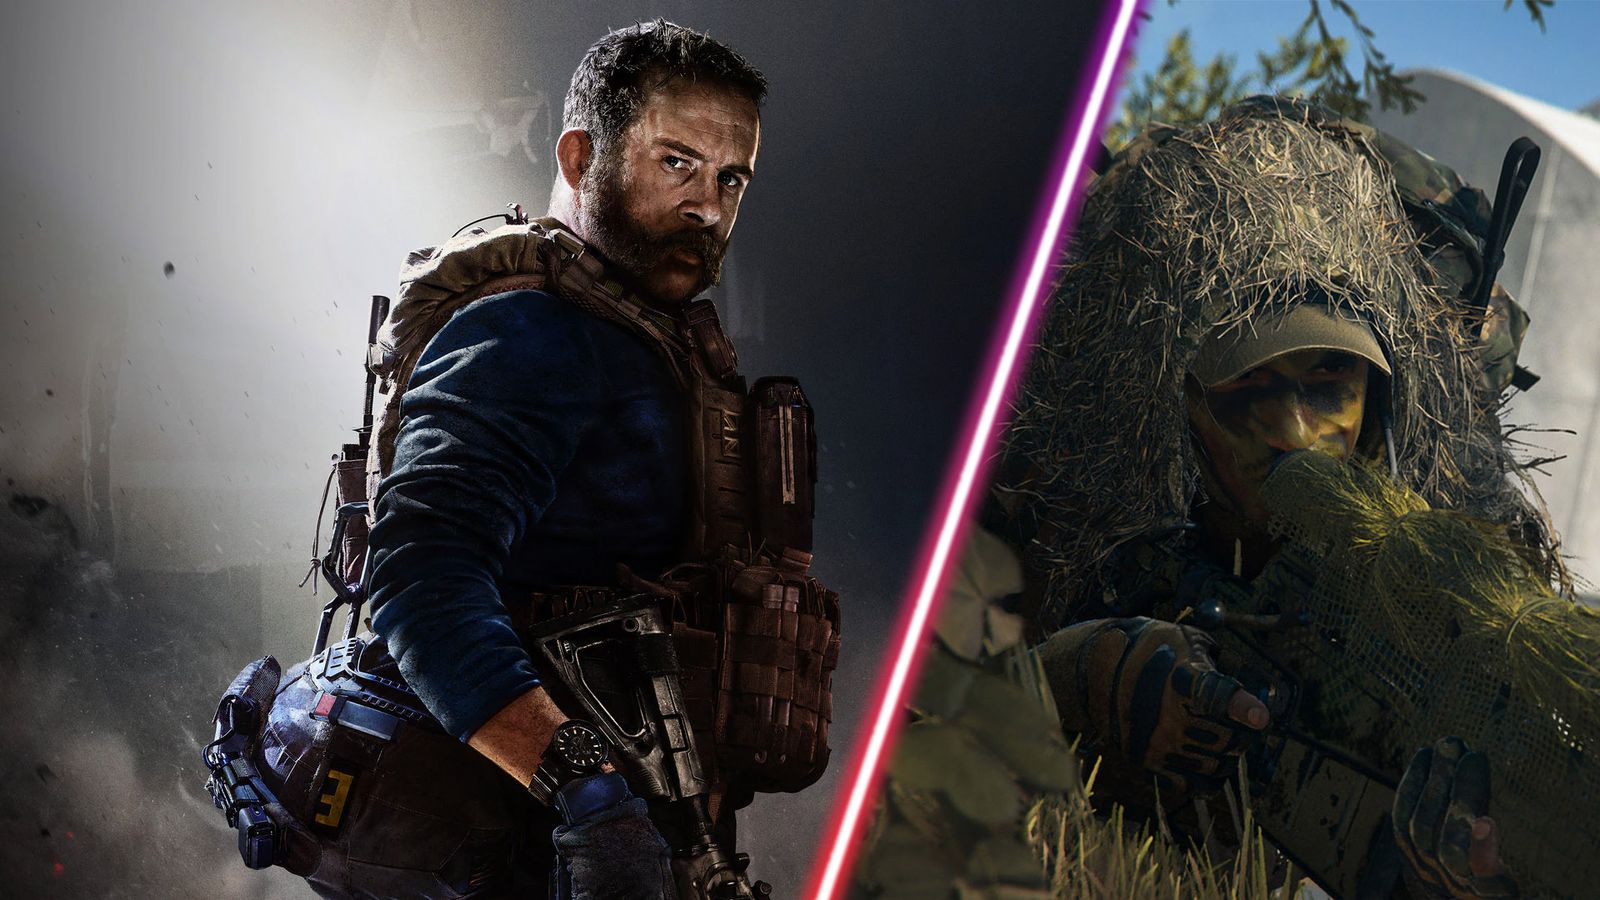 Call of Duty's Captain Price and a Call of Duty player wearing a ghillie suit.